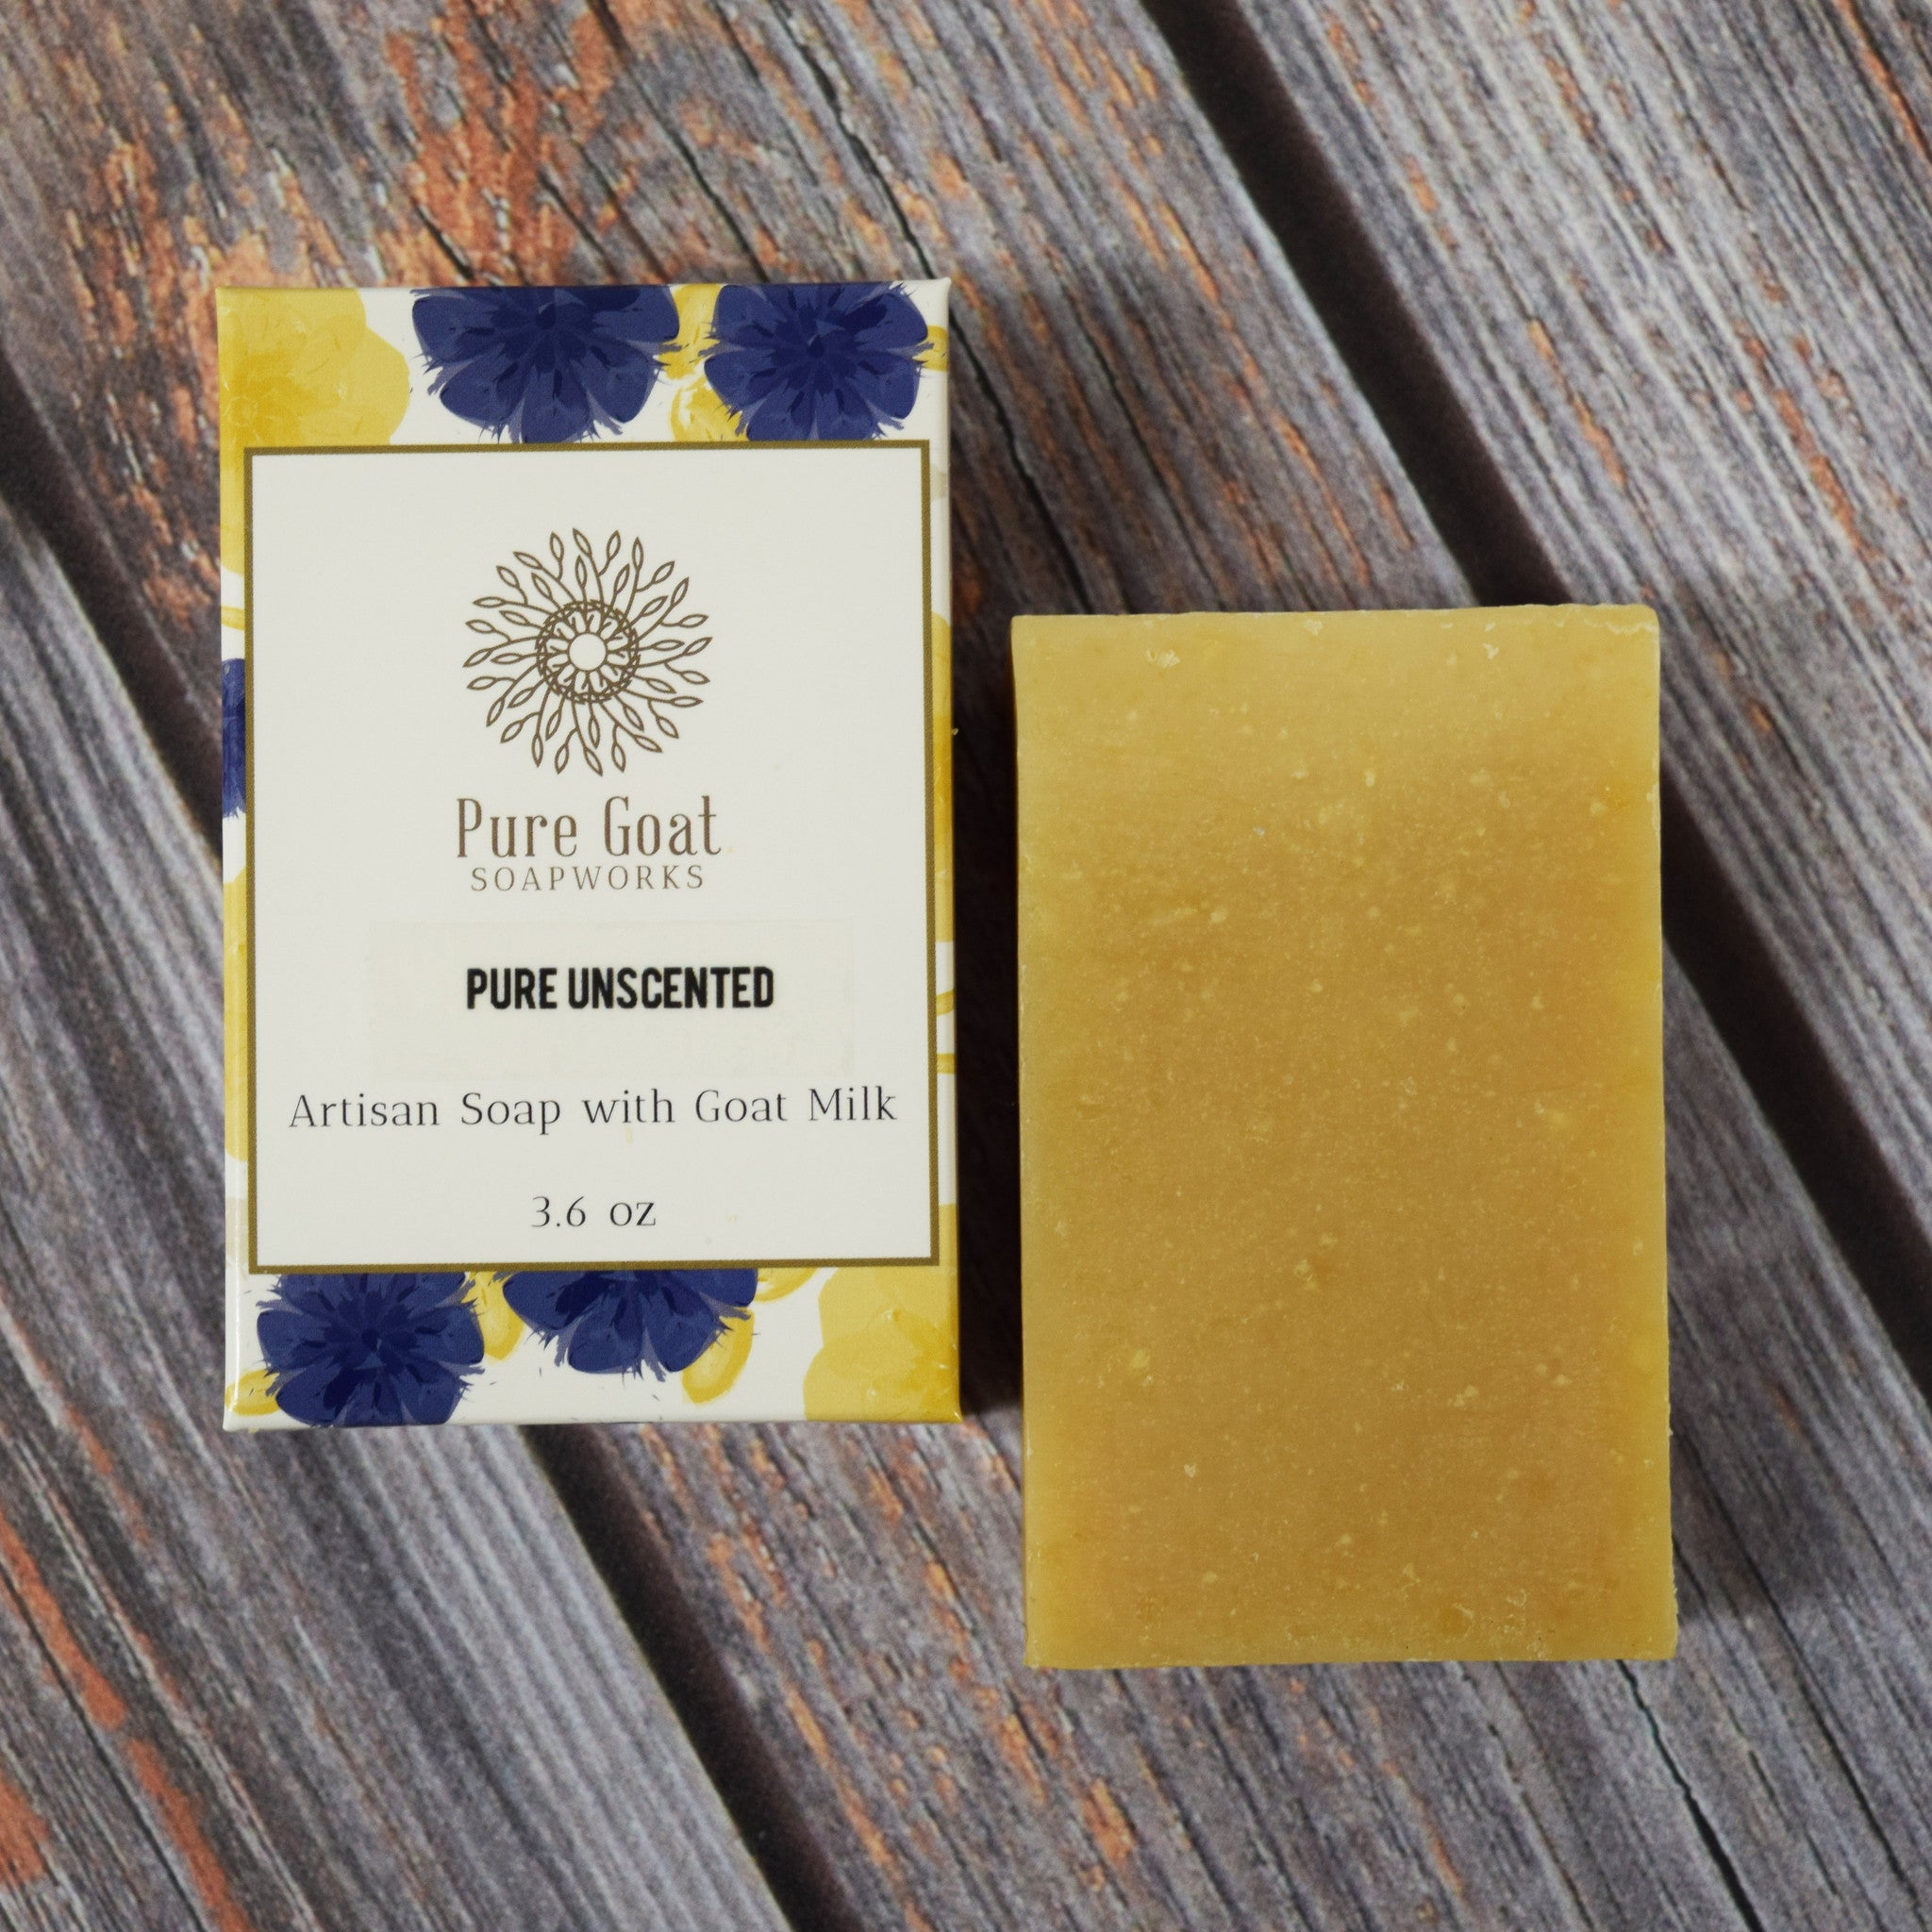 Pure Unscented Goat Milk Soap - Pure Goat Soapworks